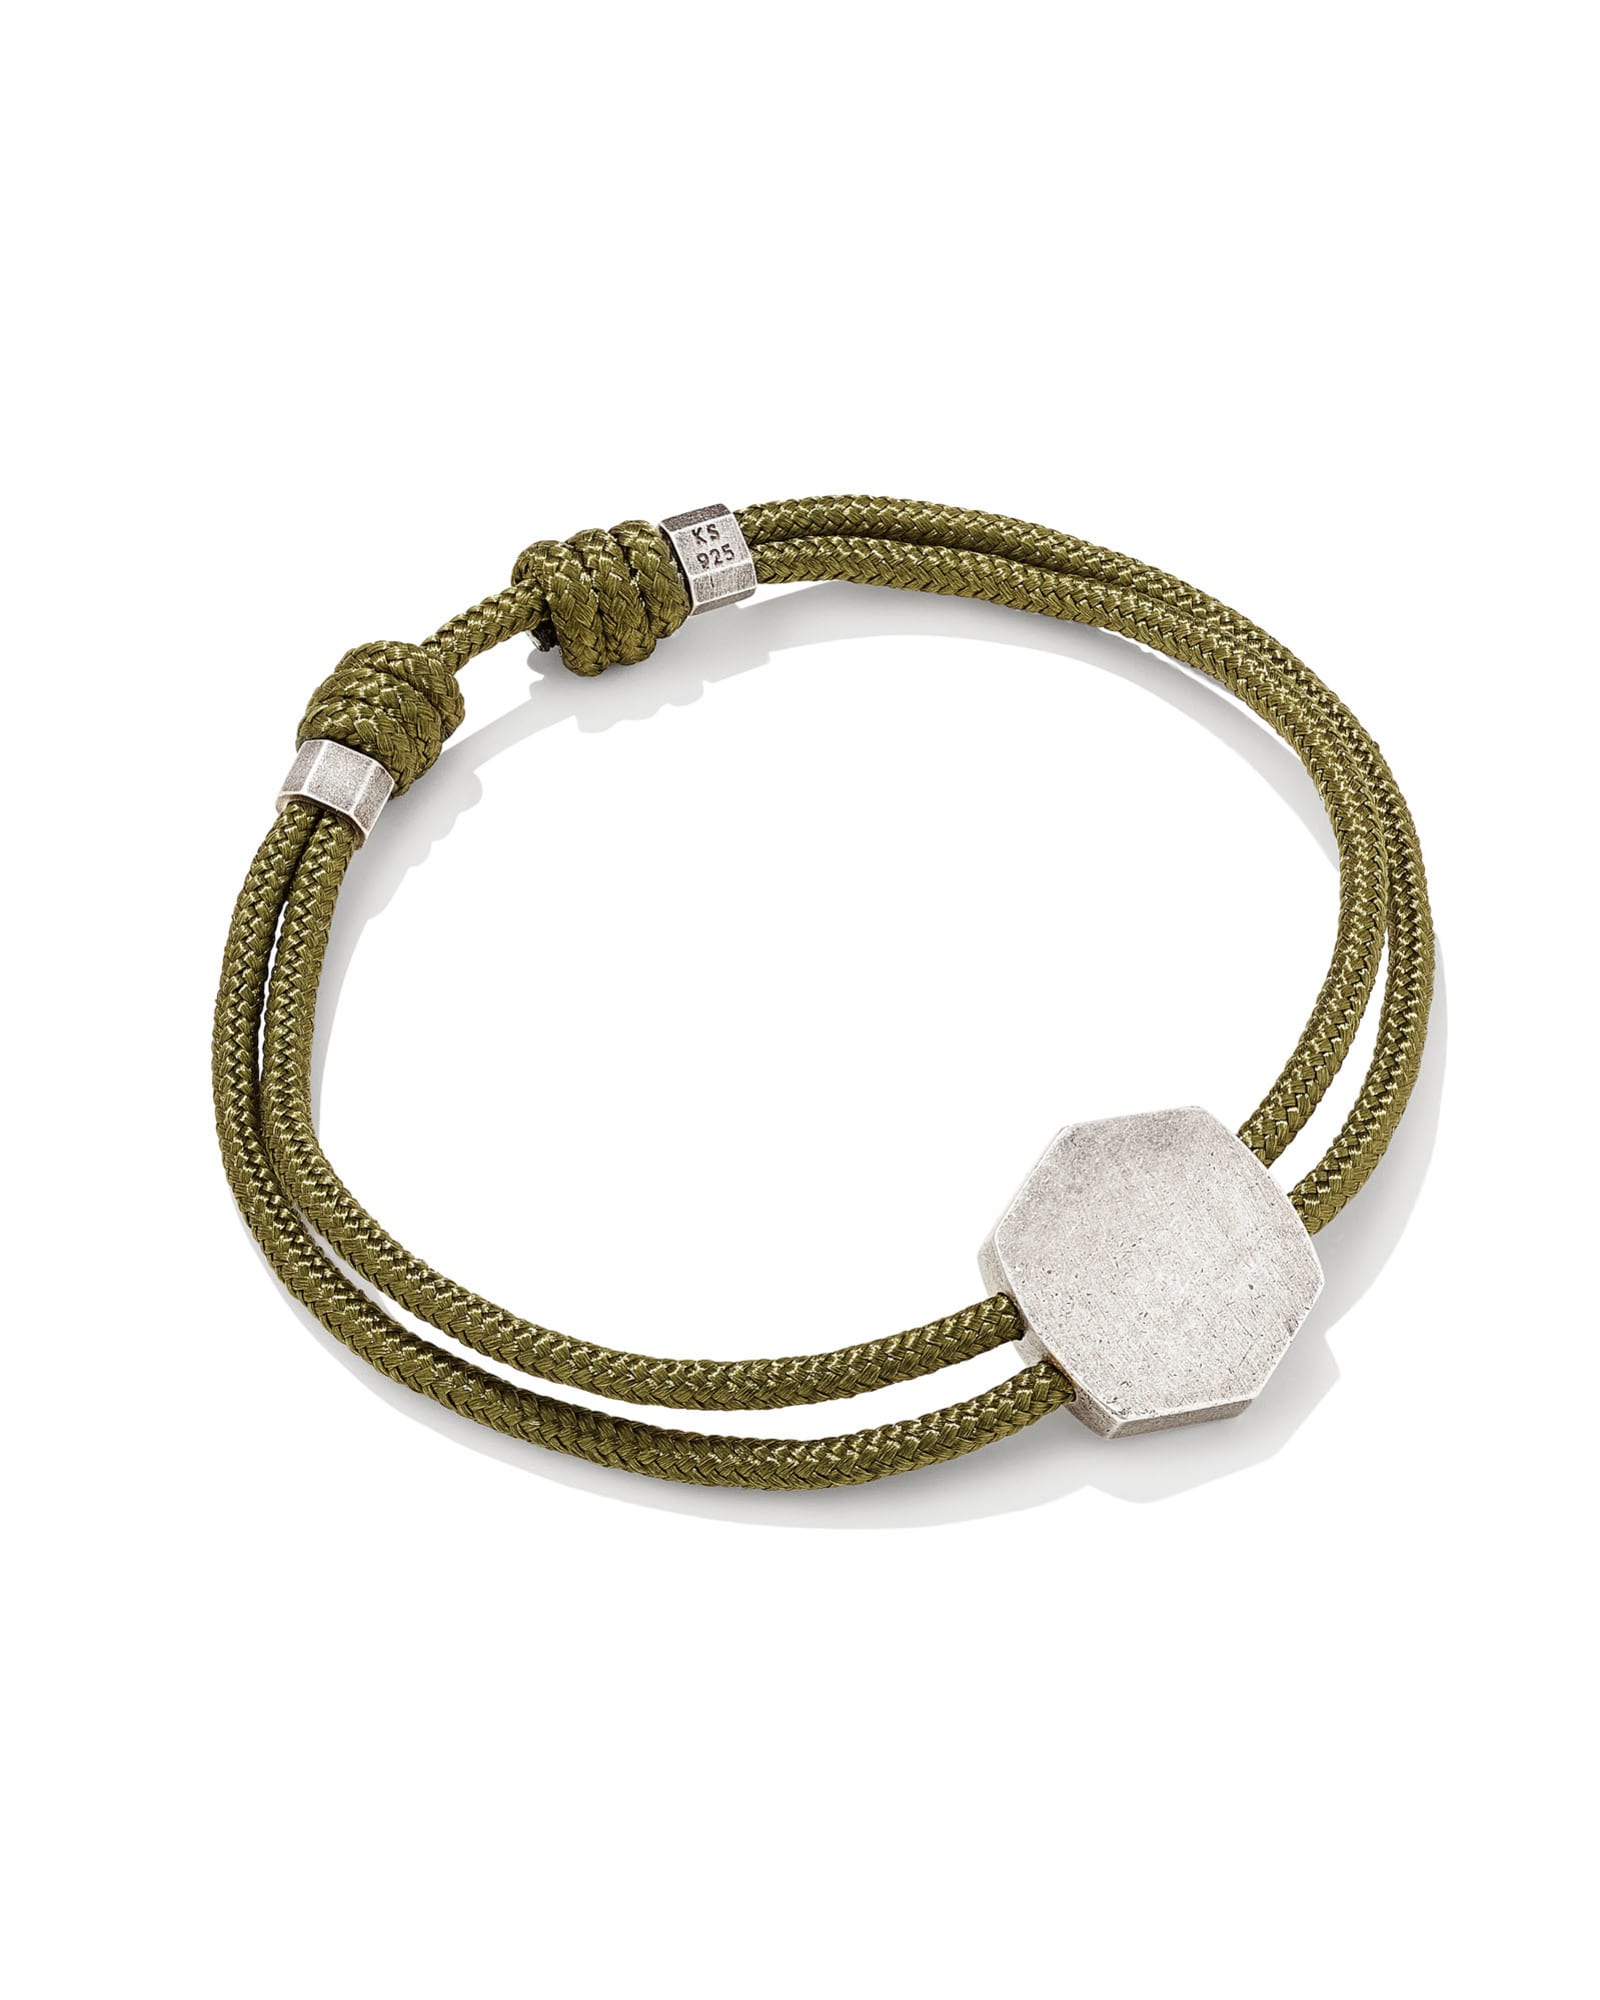 Kendra Scott Kenneth Oxidized Sterling Silver Corded Engravable Bracelet in Olive Mix | Paracord